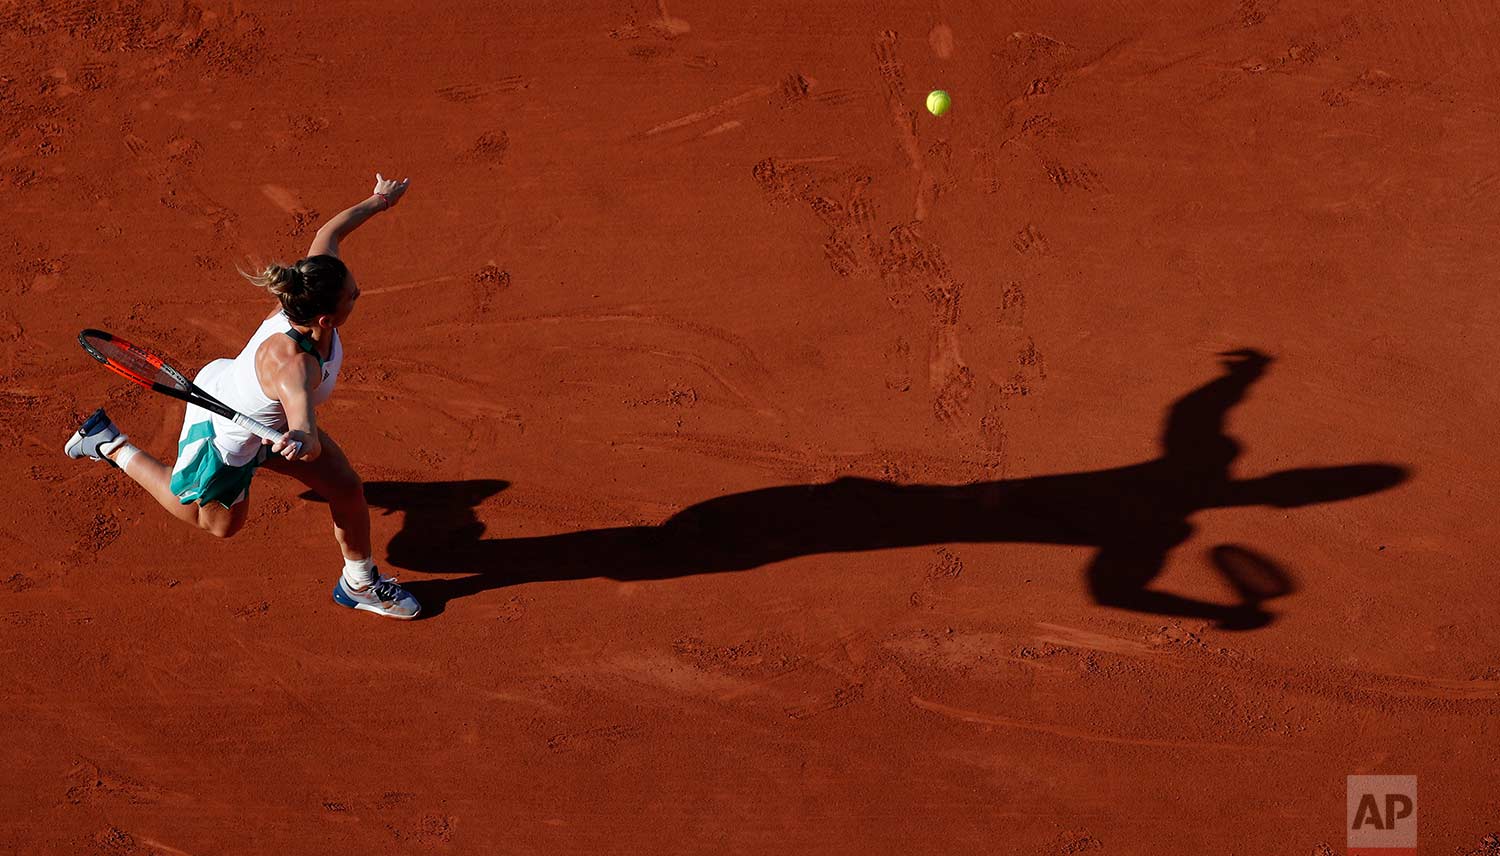  In this Tuesday, May 30, 2017 photo, Romania's Simona Halep reaches for the ball as she plays Slovakia's Jana Cepelova during their first round match of the French Open tennis tournament at the Roland Garros stadium in Paris. (AP Photo/Christophe En